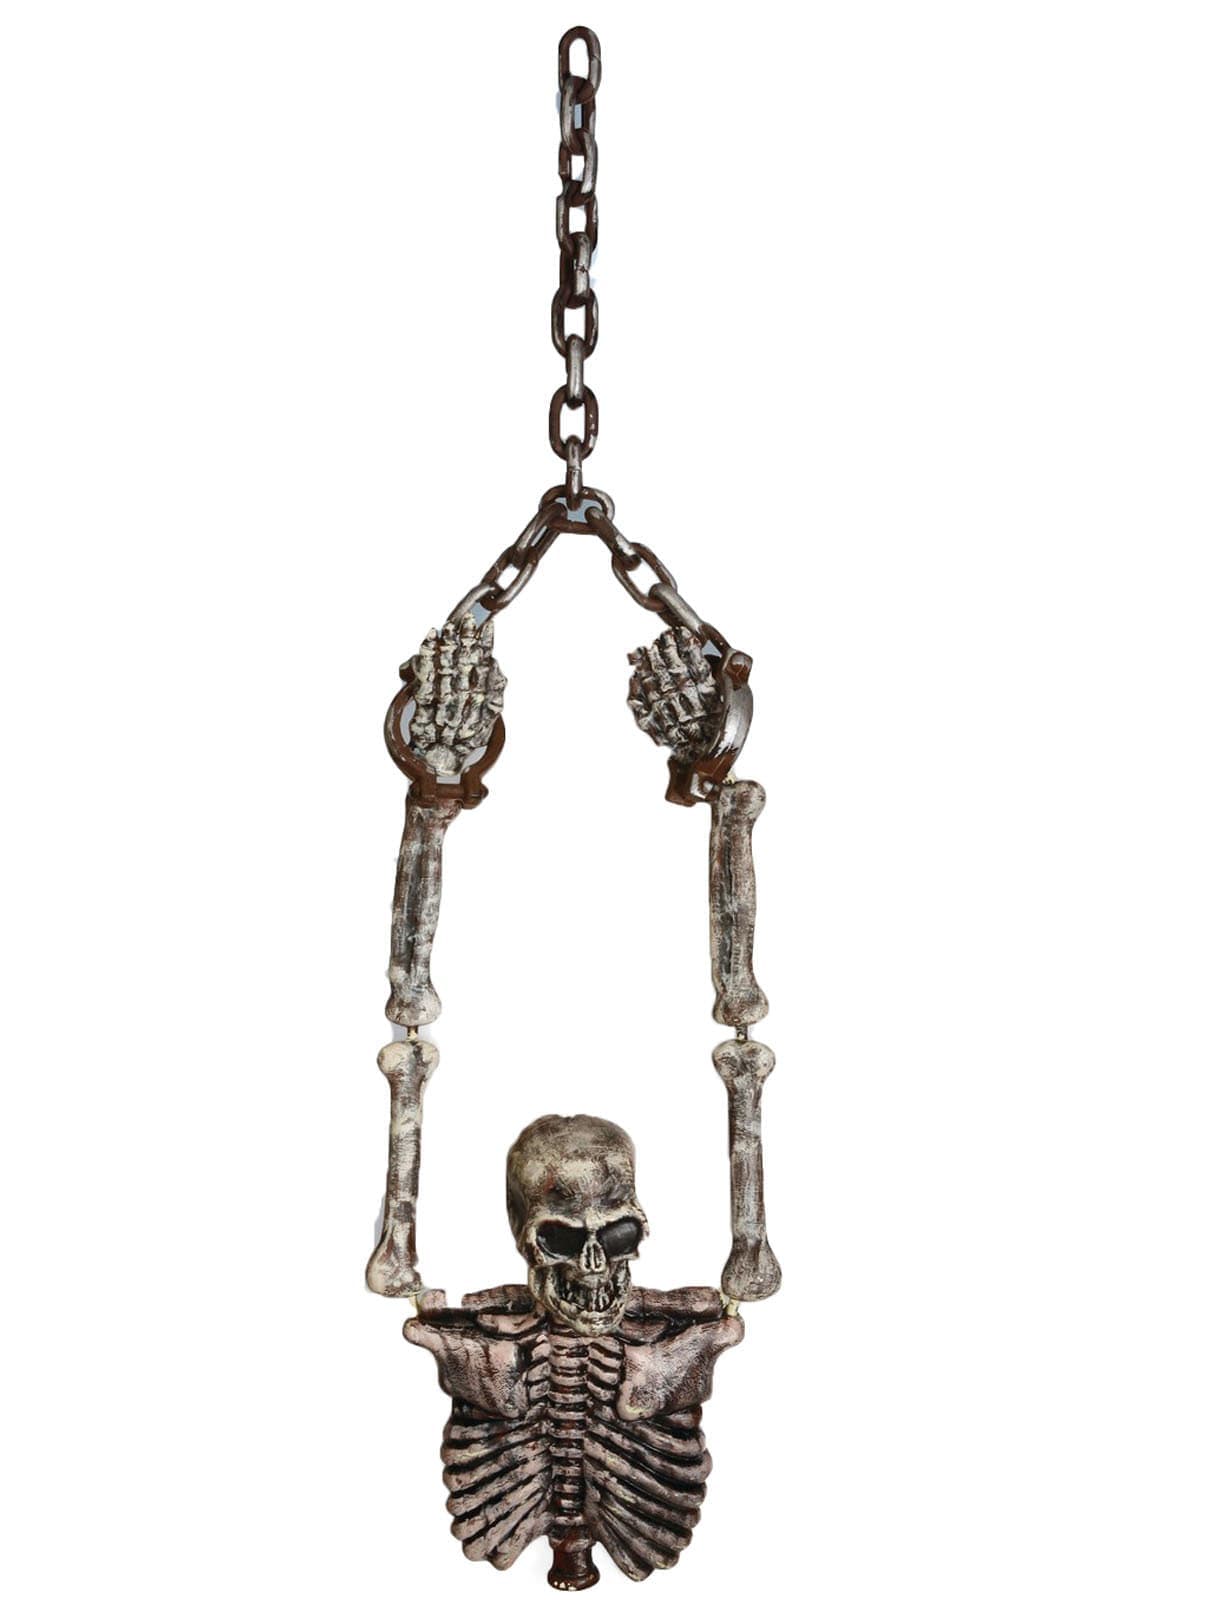 Chained Hanging Skeleton Torso Decoration - costumes.com